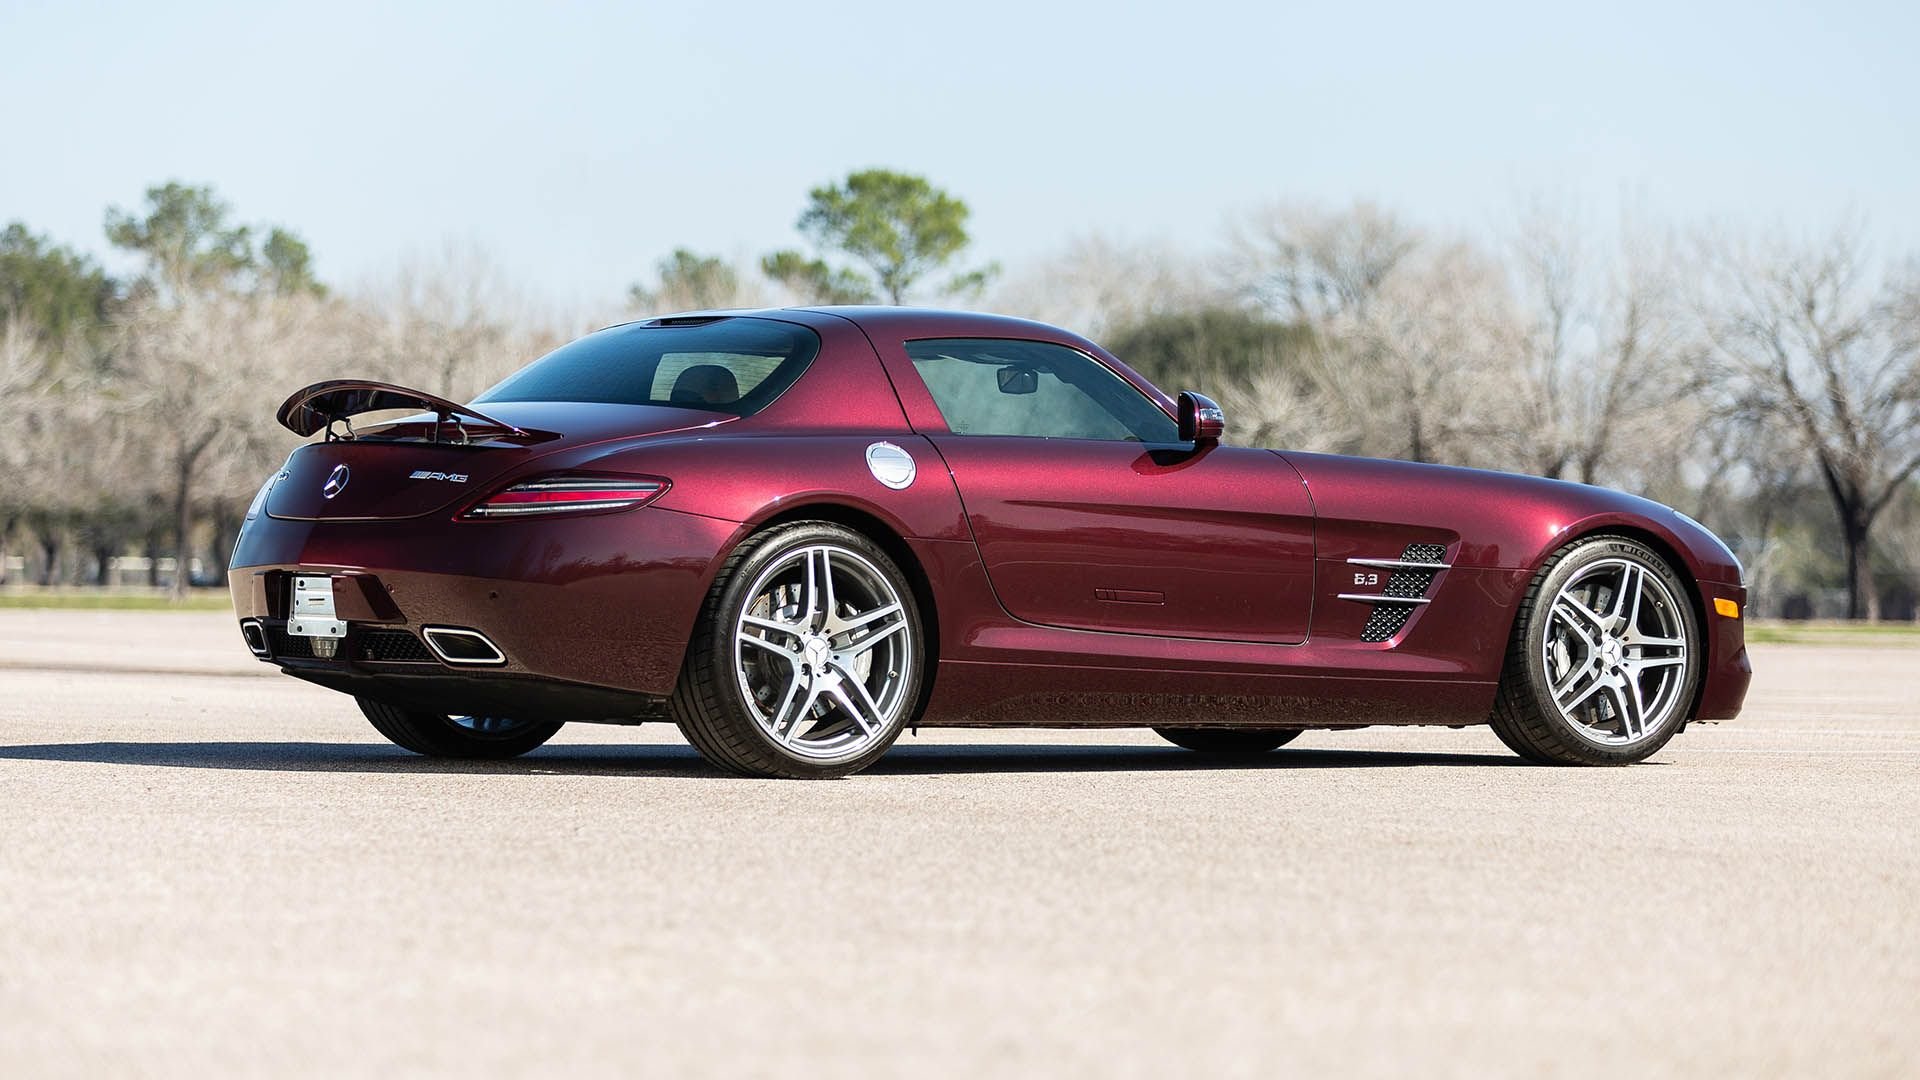 For Sale 2012 Mercedes-Benz SLS AMG Coupe